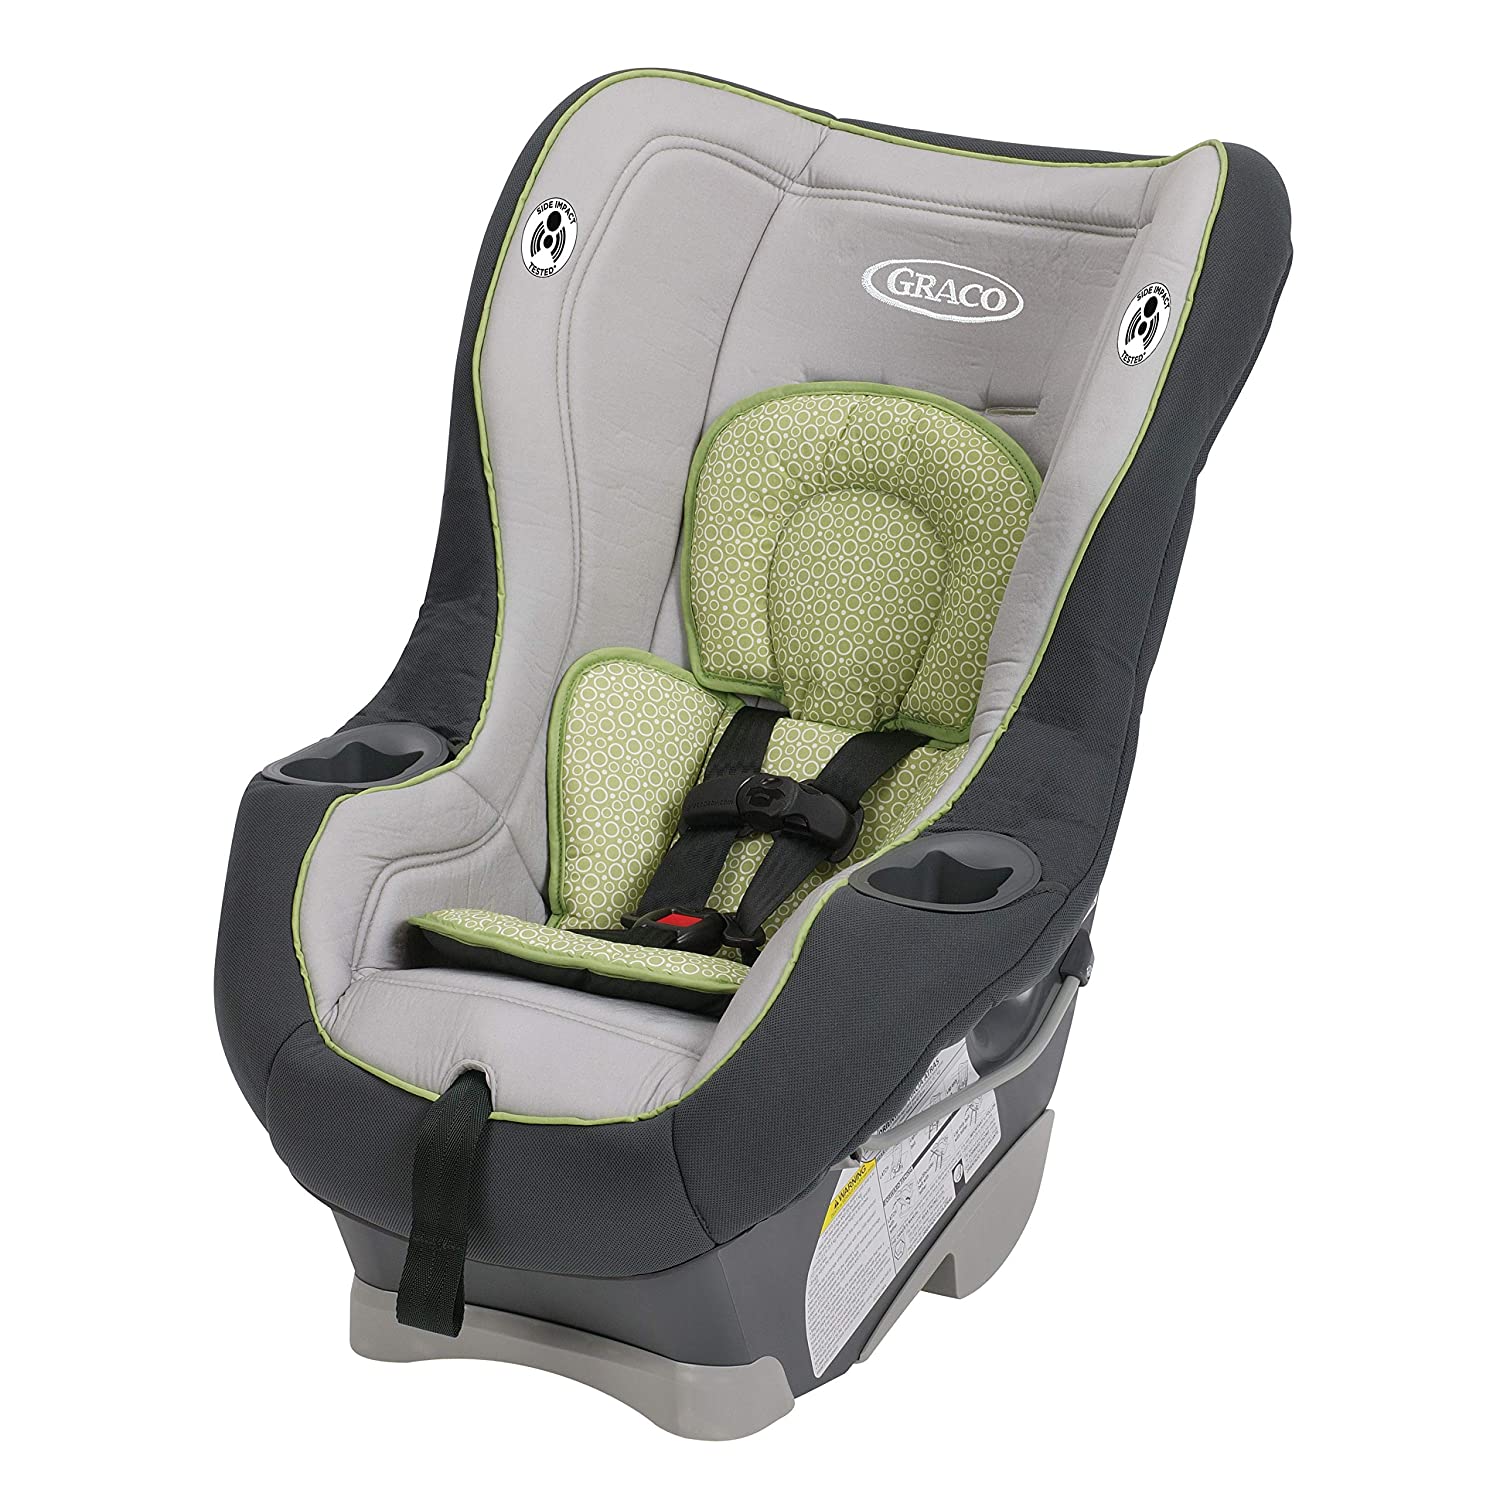 Top 5 Best Affordable Convertible Car Seats Reviews in 2023 2